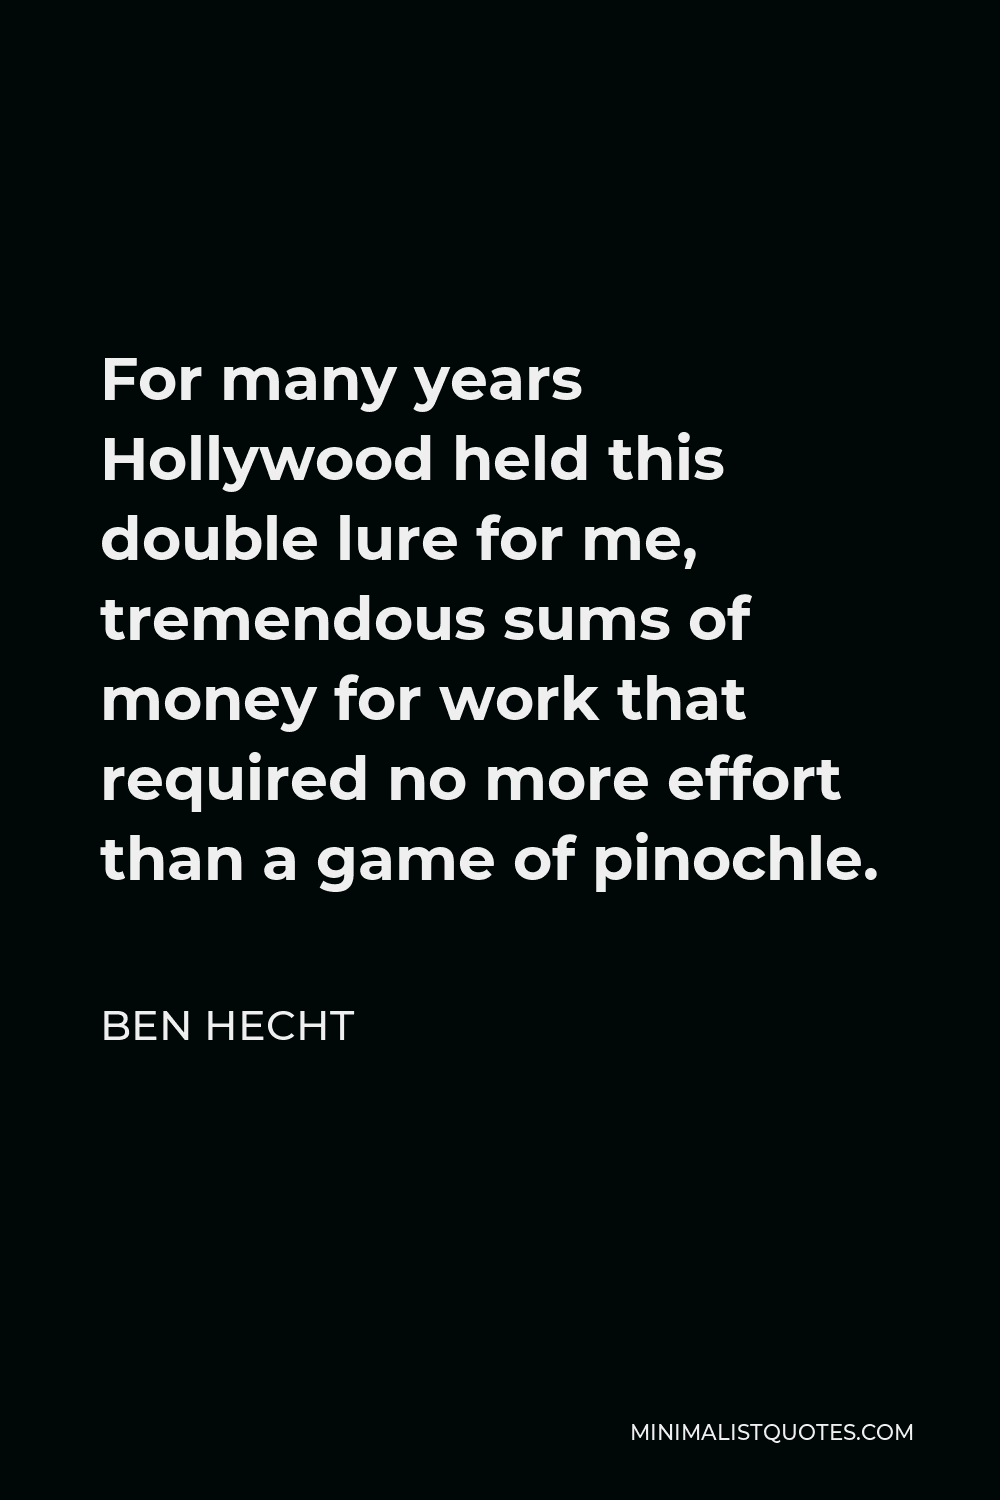 Ben Hecht Quote - For many years Hollywood held this double lure for me, tremendous sums of money for work that required no more effort than a game of pinochle.